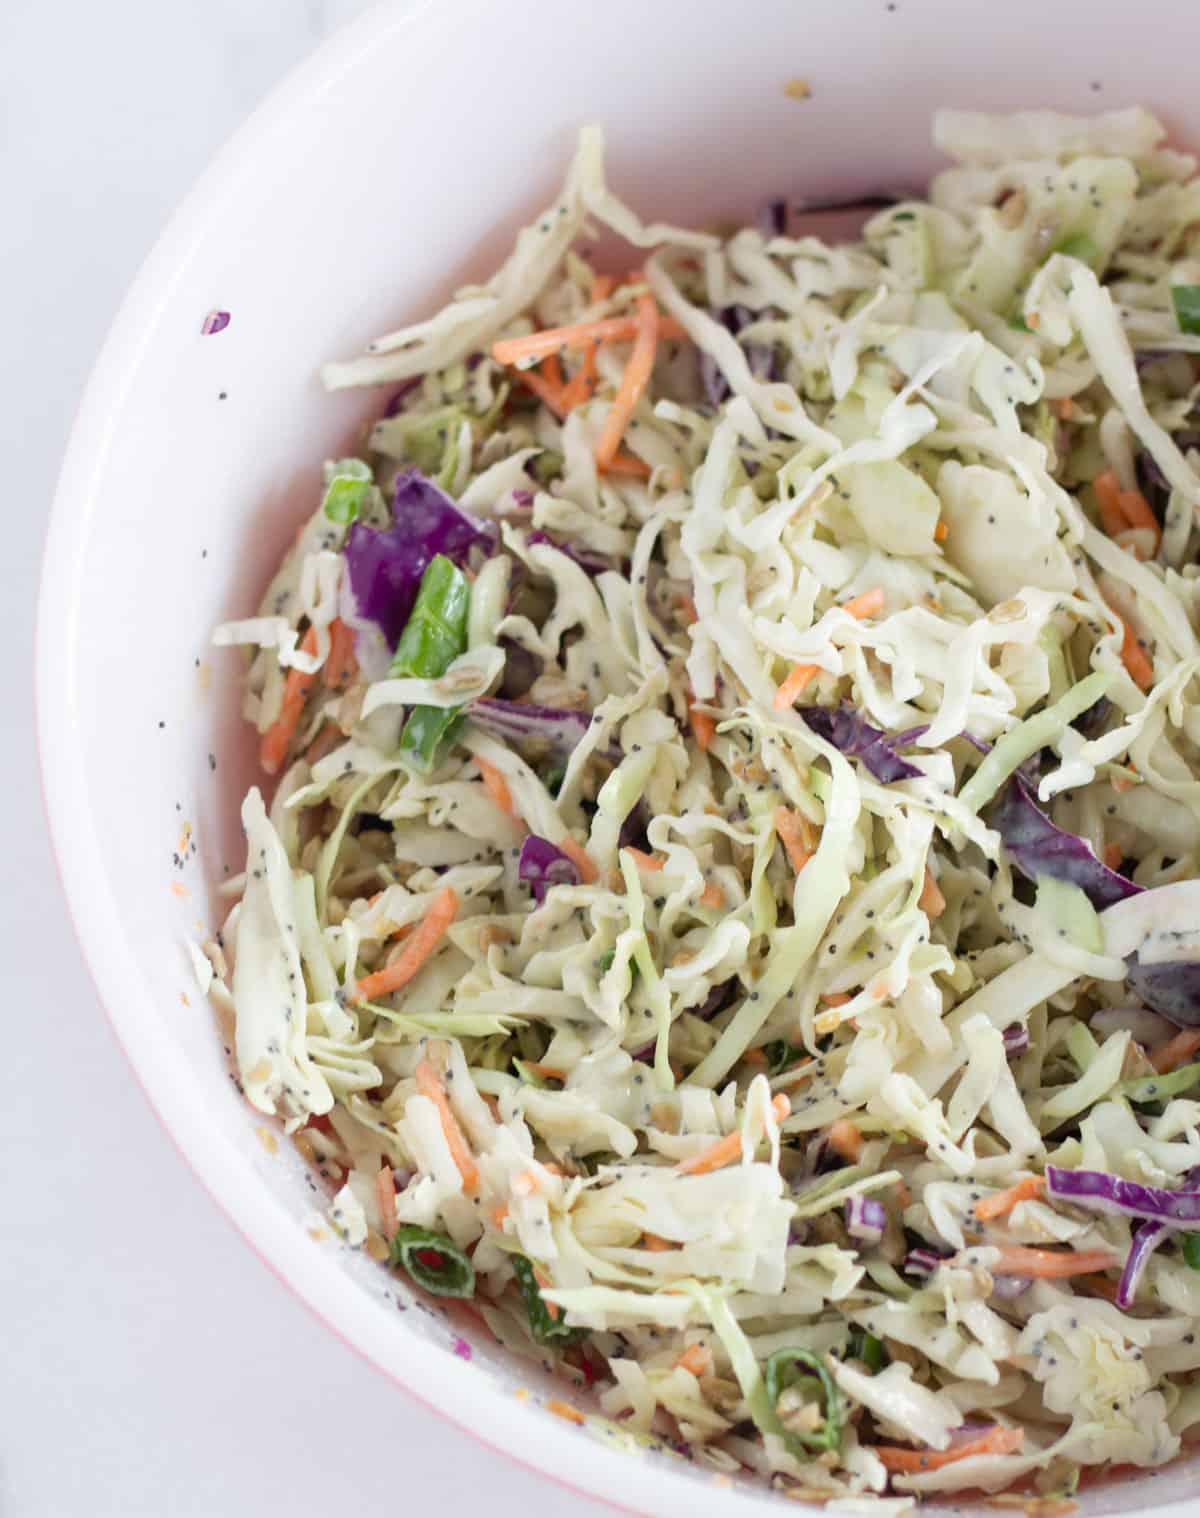 prepared coleslaw in a large bowl